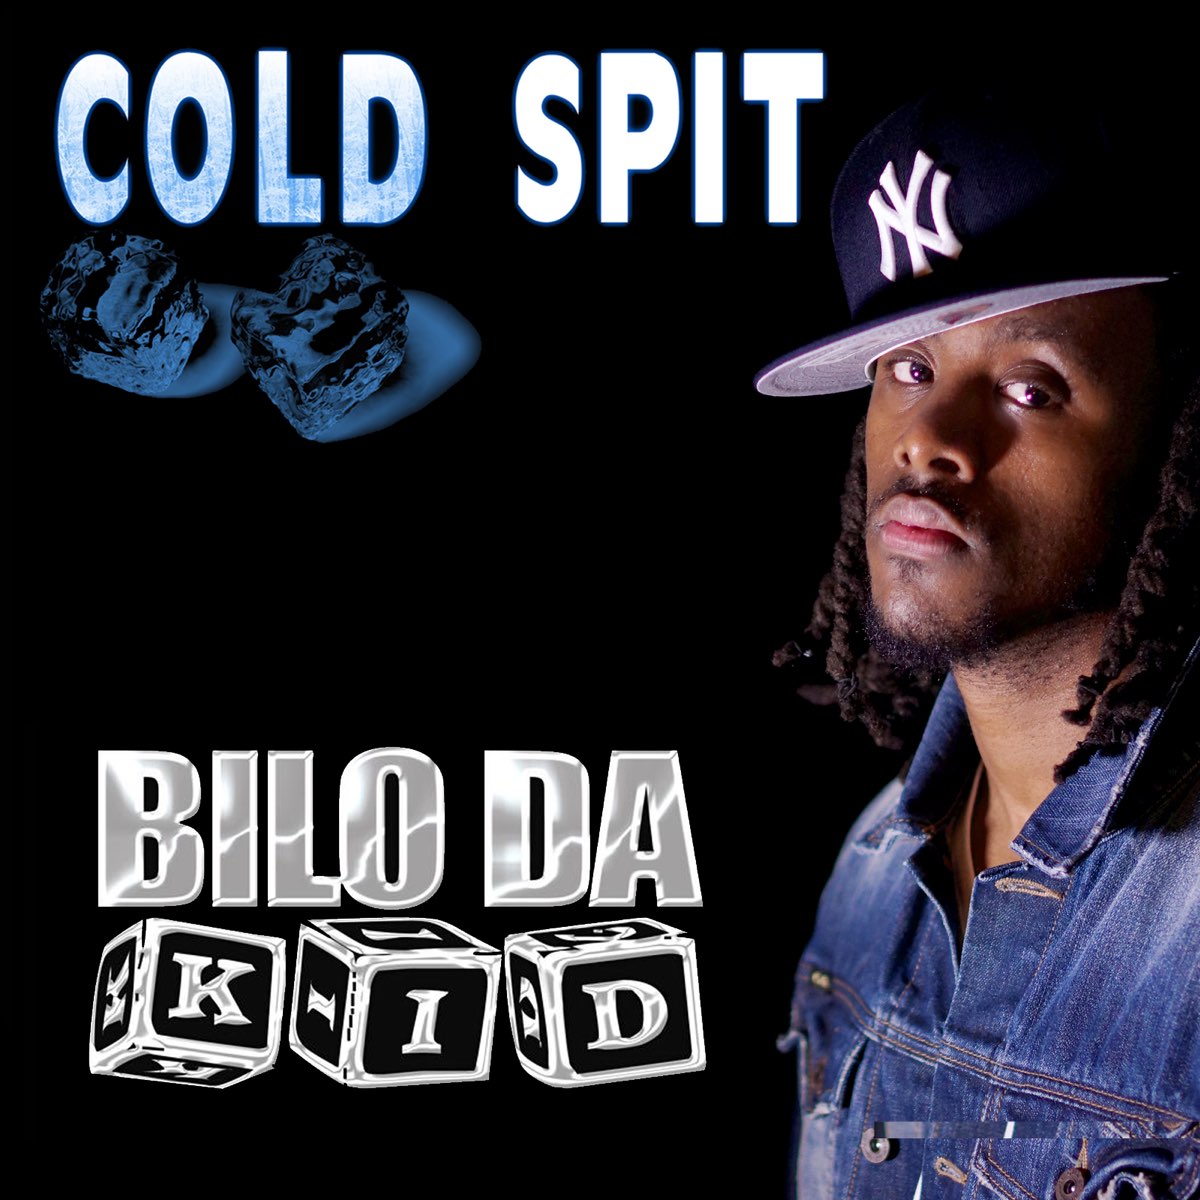 Cold Music. Cold Music face. Cold kid